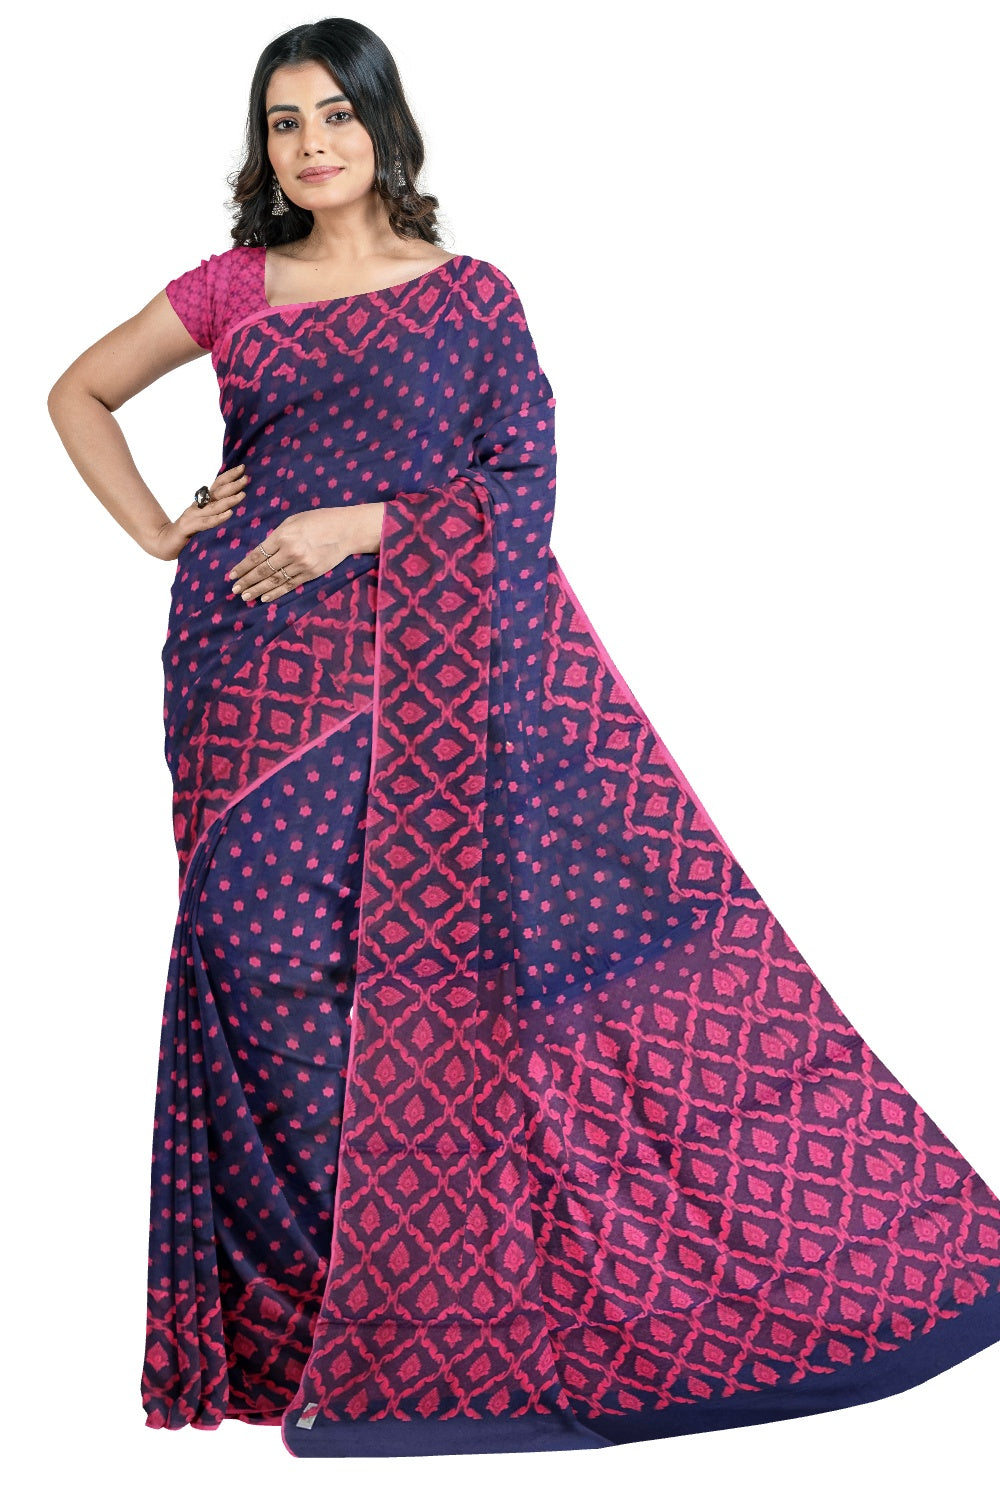 Southloom Sico Gadwal Semi Silk Saree in Dark Blue and Violet with Floral Motifs (Blouse Piece with Work)